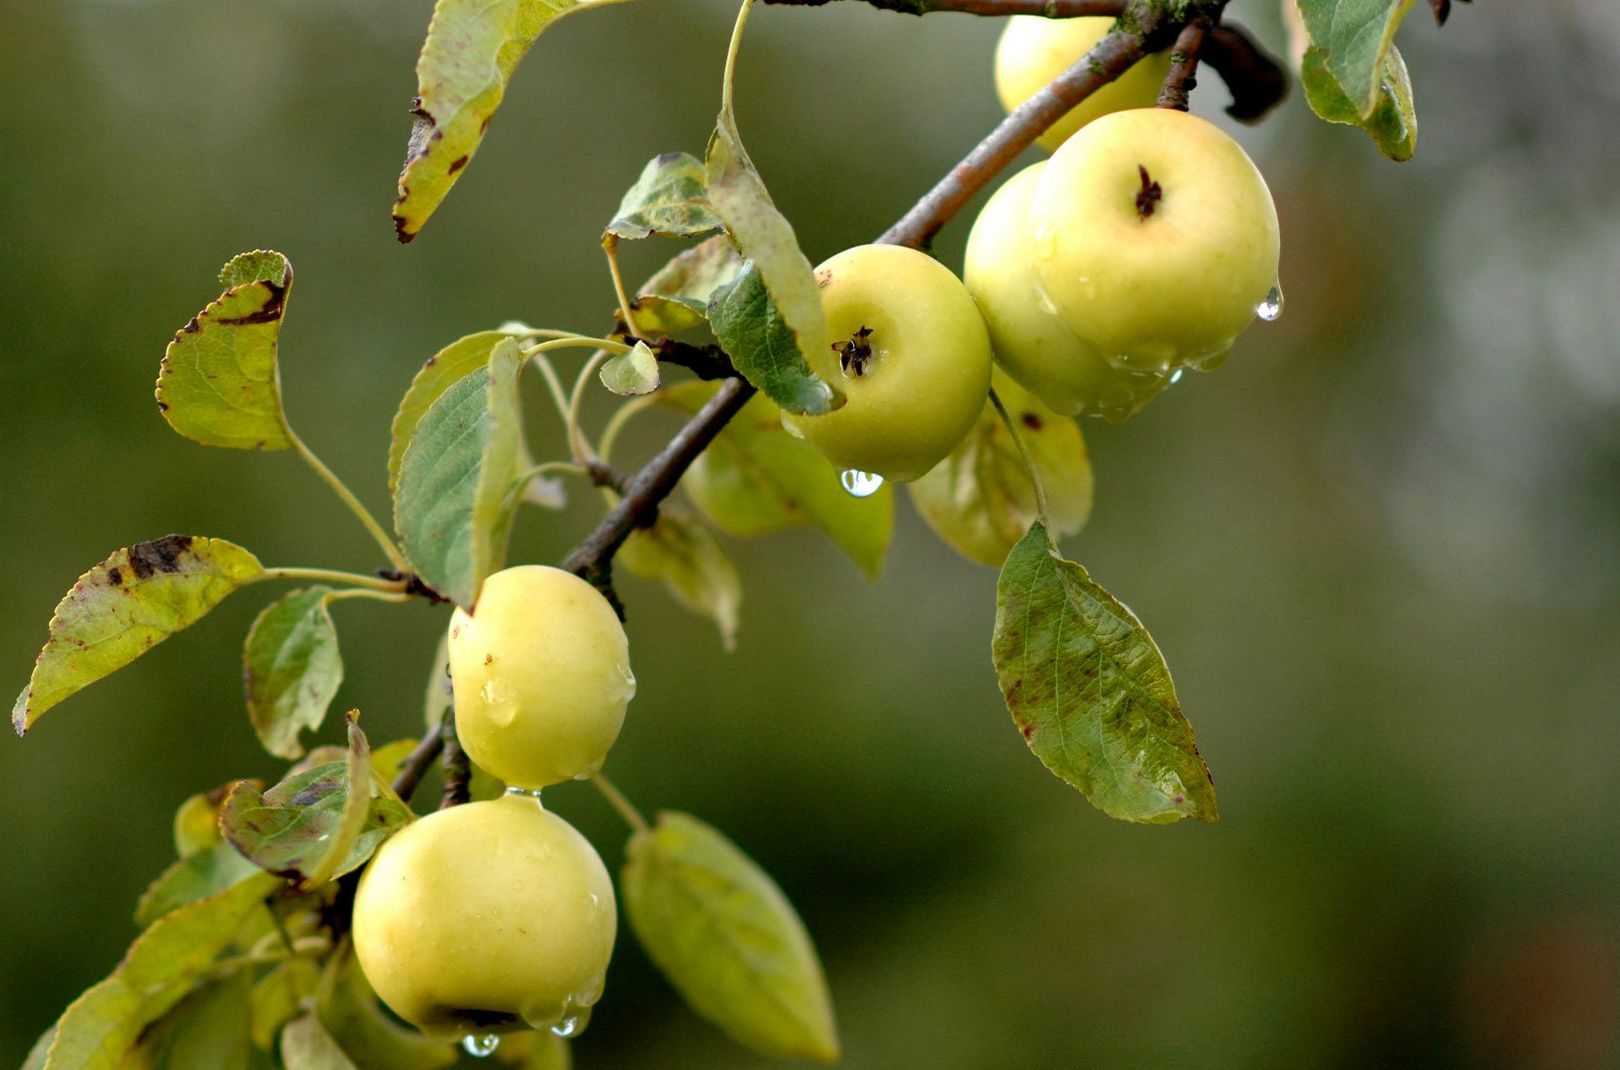 Wild green apples growing on an apple tree in the UK